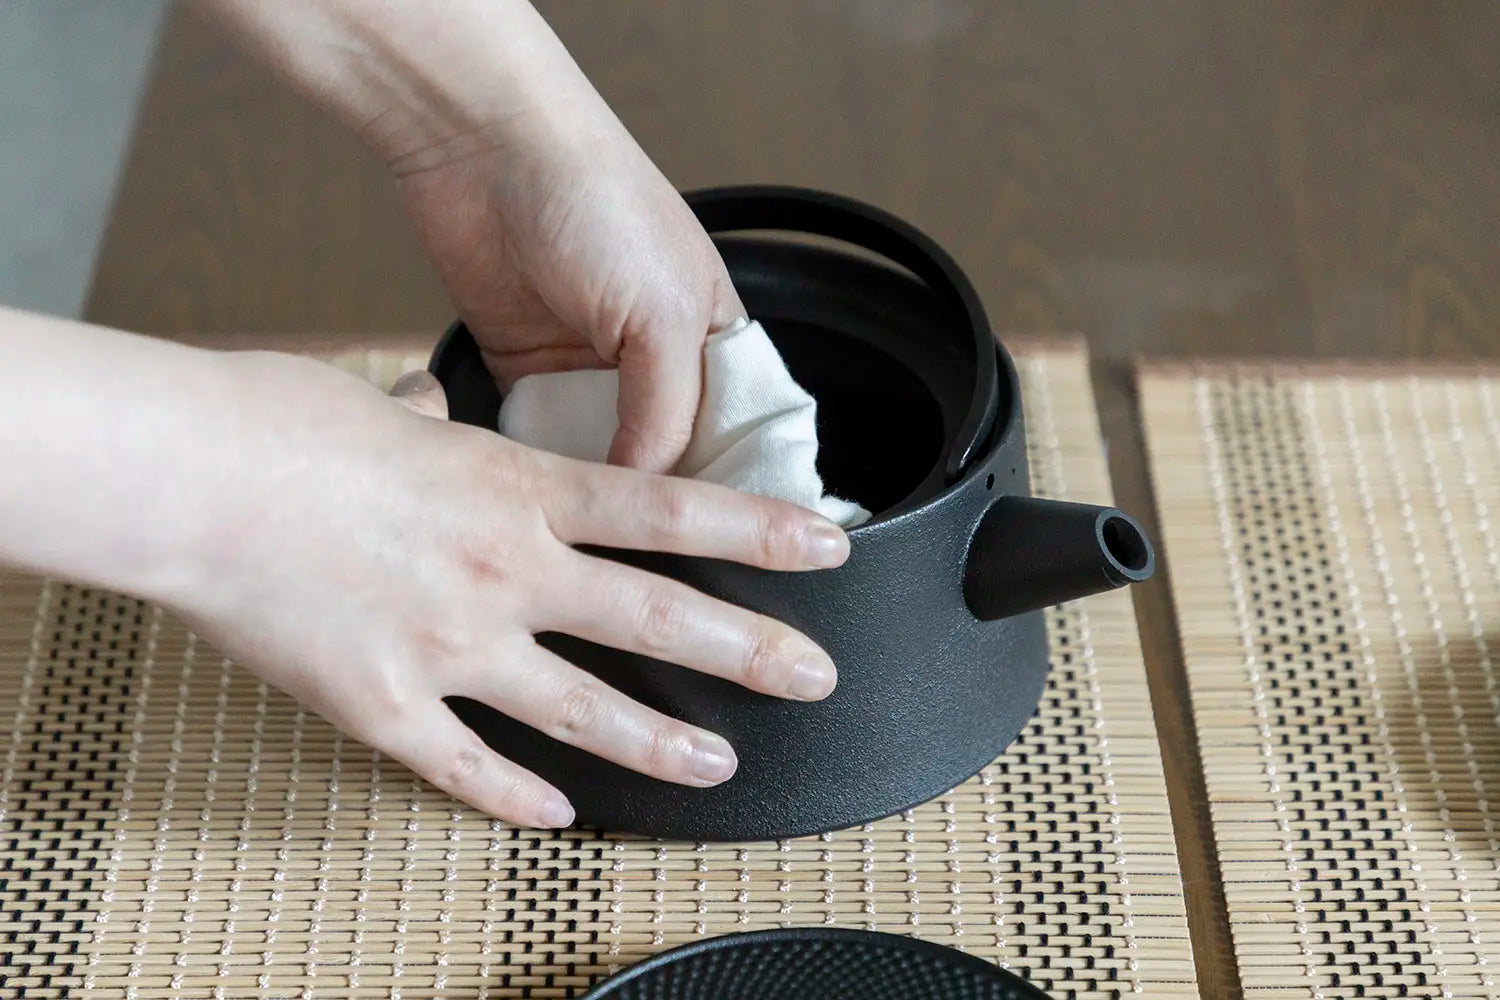 Wiping an iron kettle with a sarashi